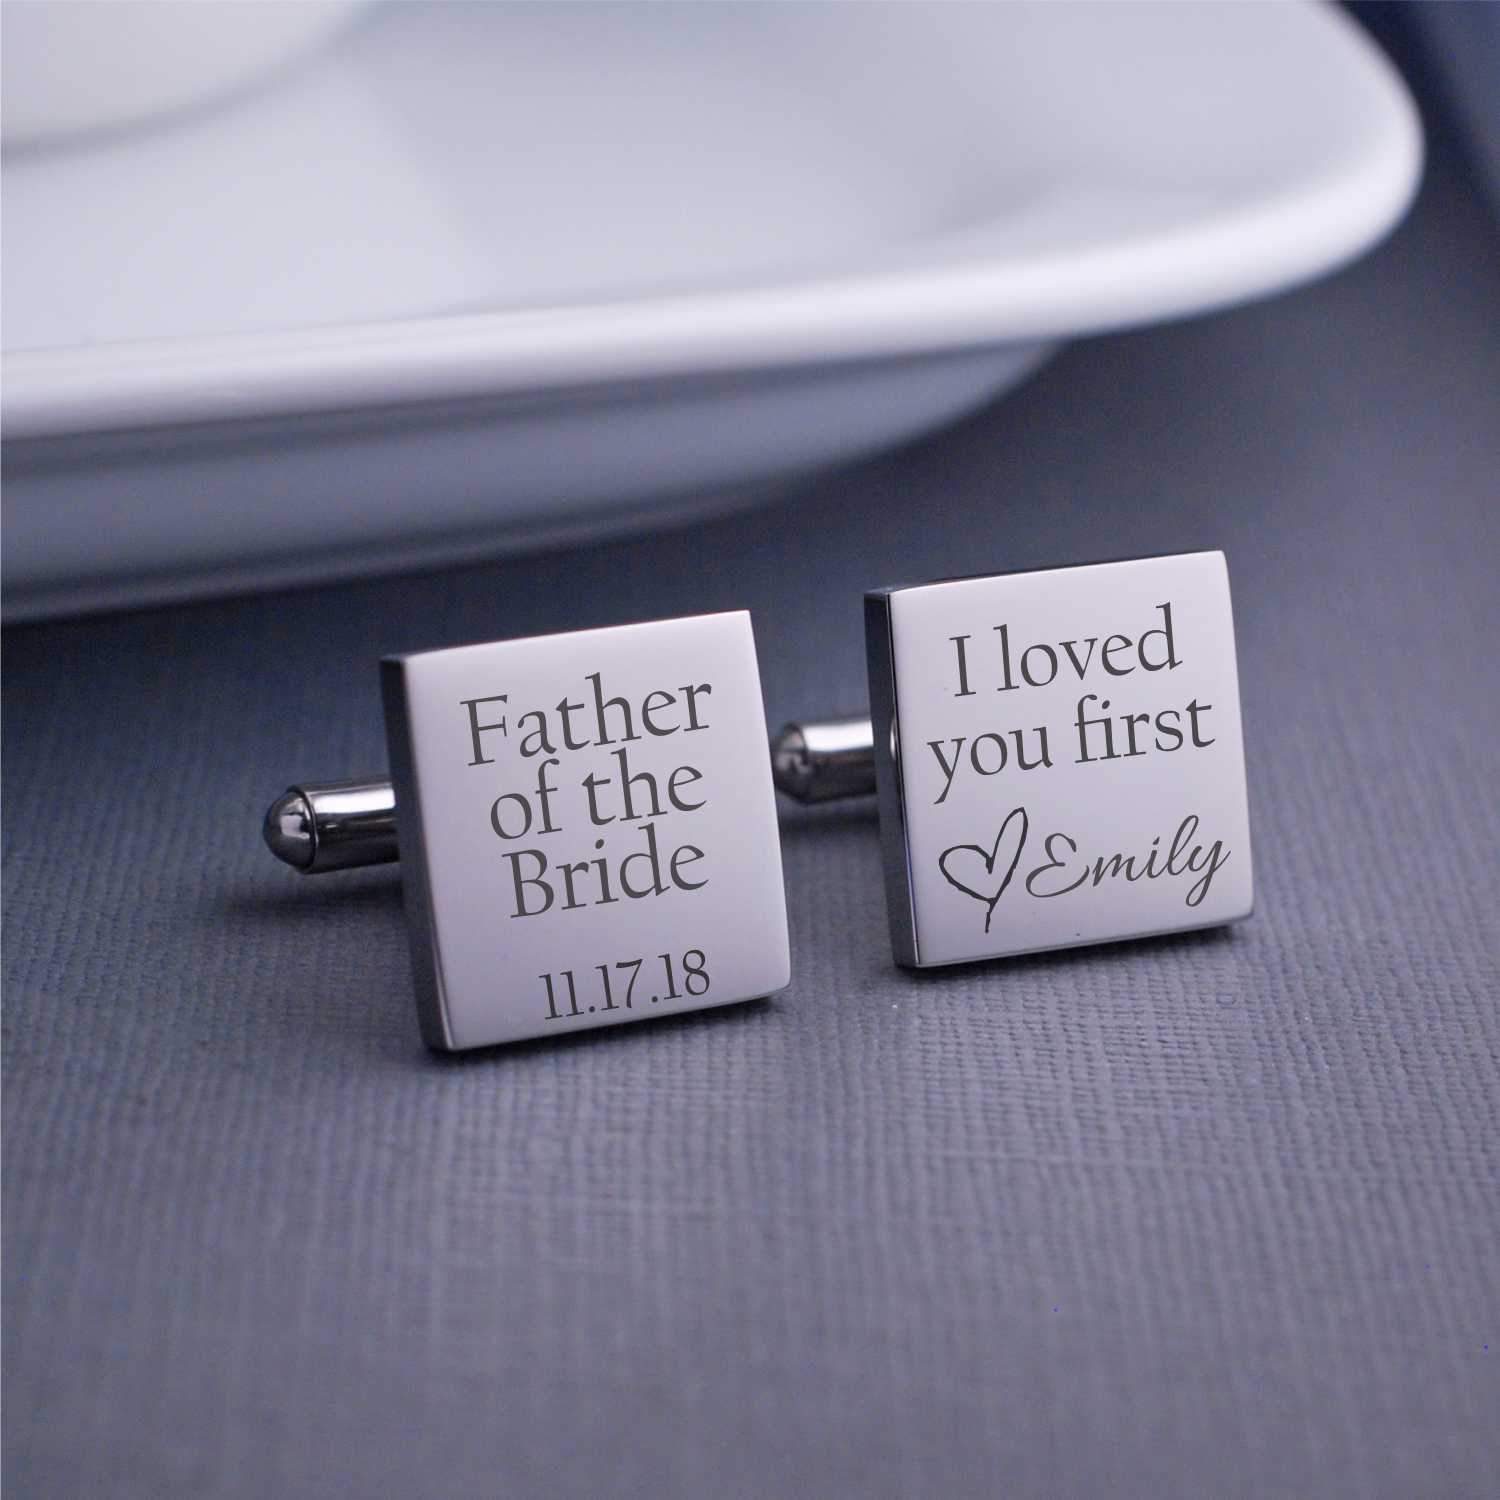 father of the bride cufflinks, stainless steel, square shape, engraved with "father of the bride" and the wedding date on one cufflink, and "i loved you first" and "love emily" on the second cufflink